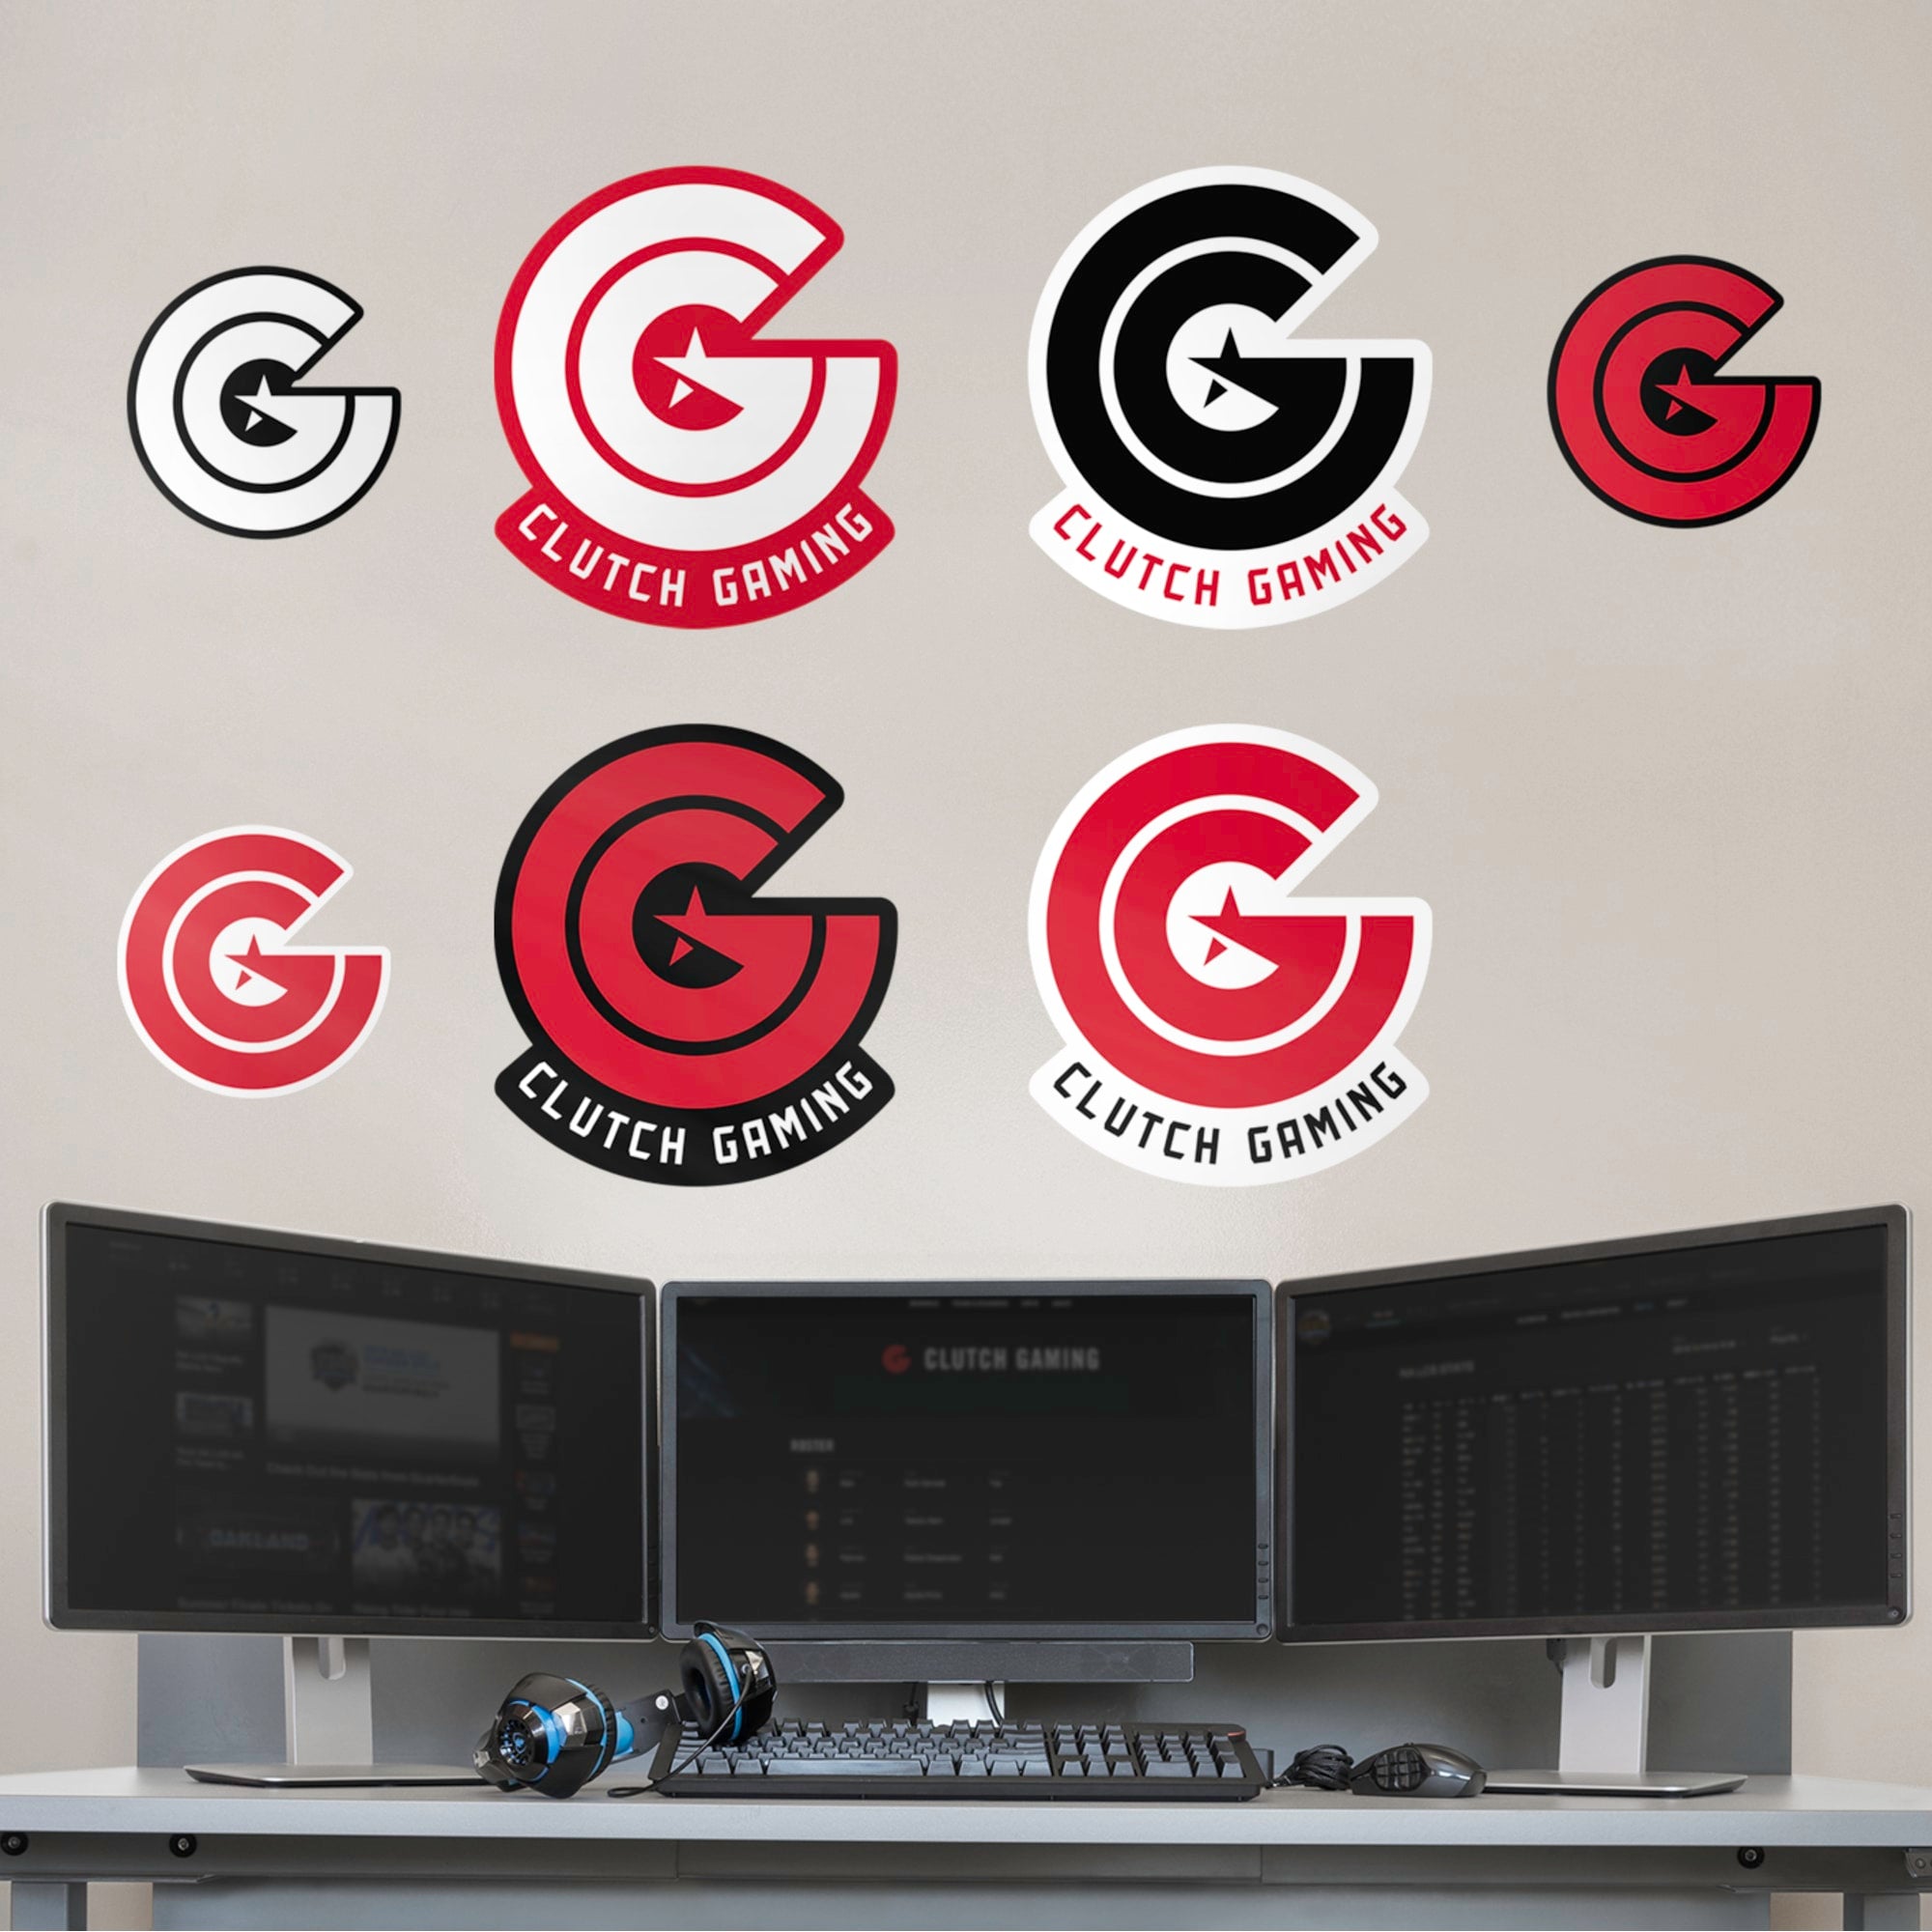 Clutch Gaming: Logo Collection - Officially Licensed Removable Wall Decal 16.5"W x 19.0"H by Fathead | Vinyl